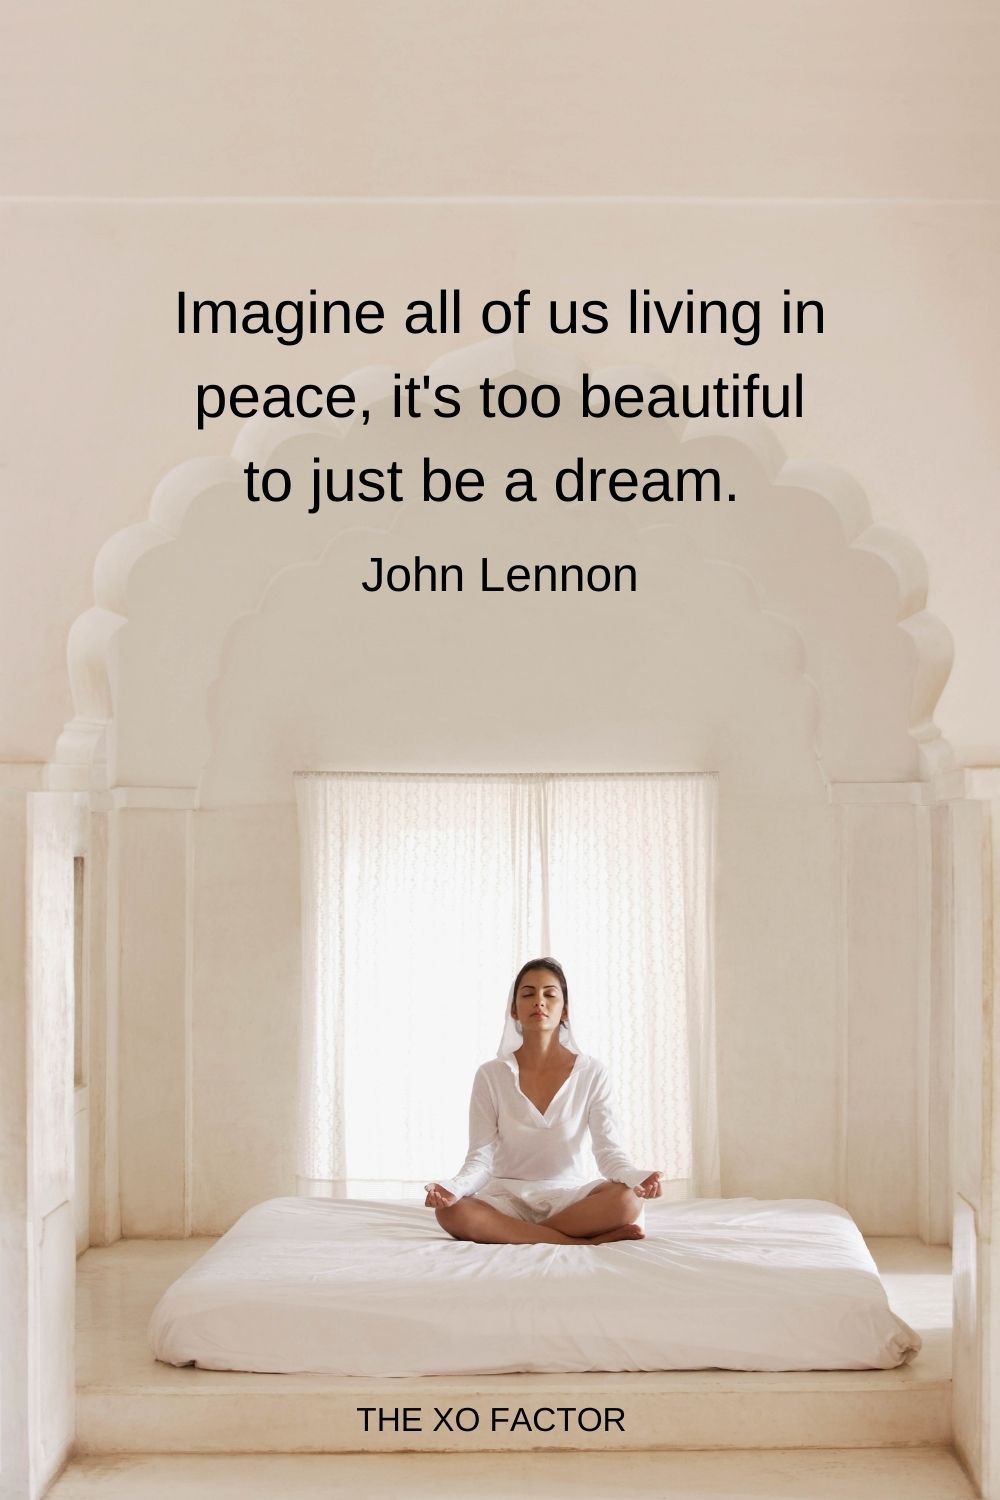 Imagine all of us living in peace, it's too beautiful to just be a dream.  John Lennon